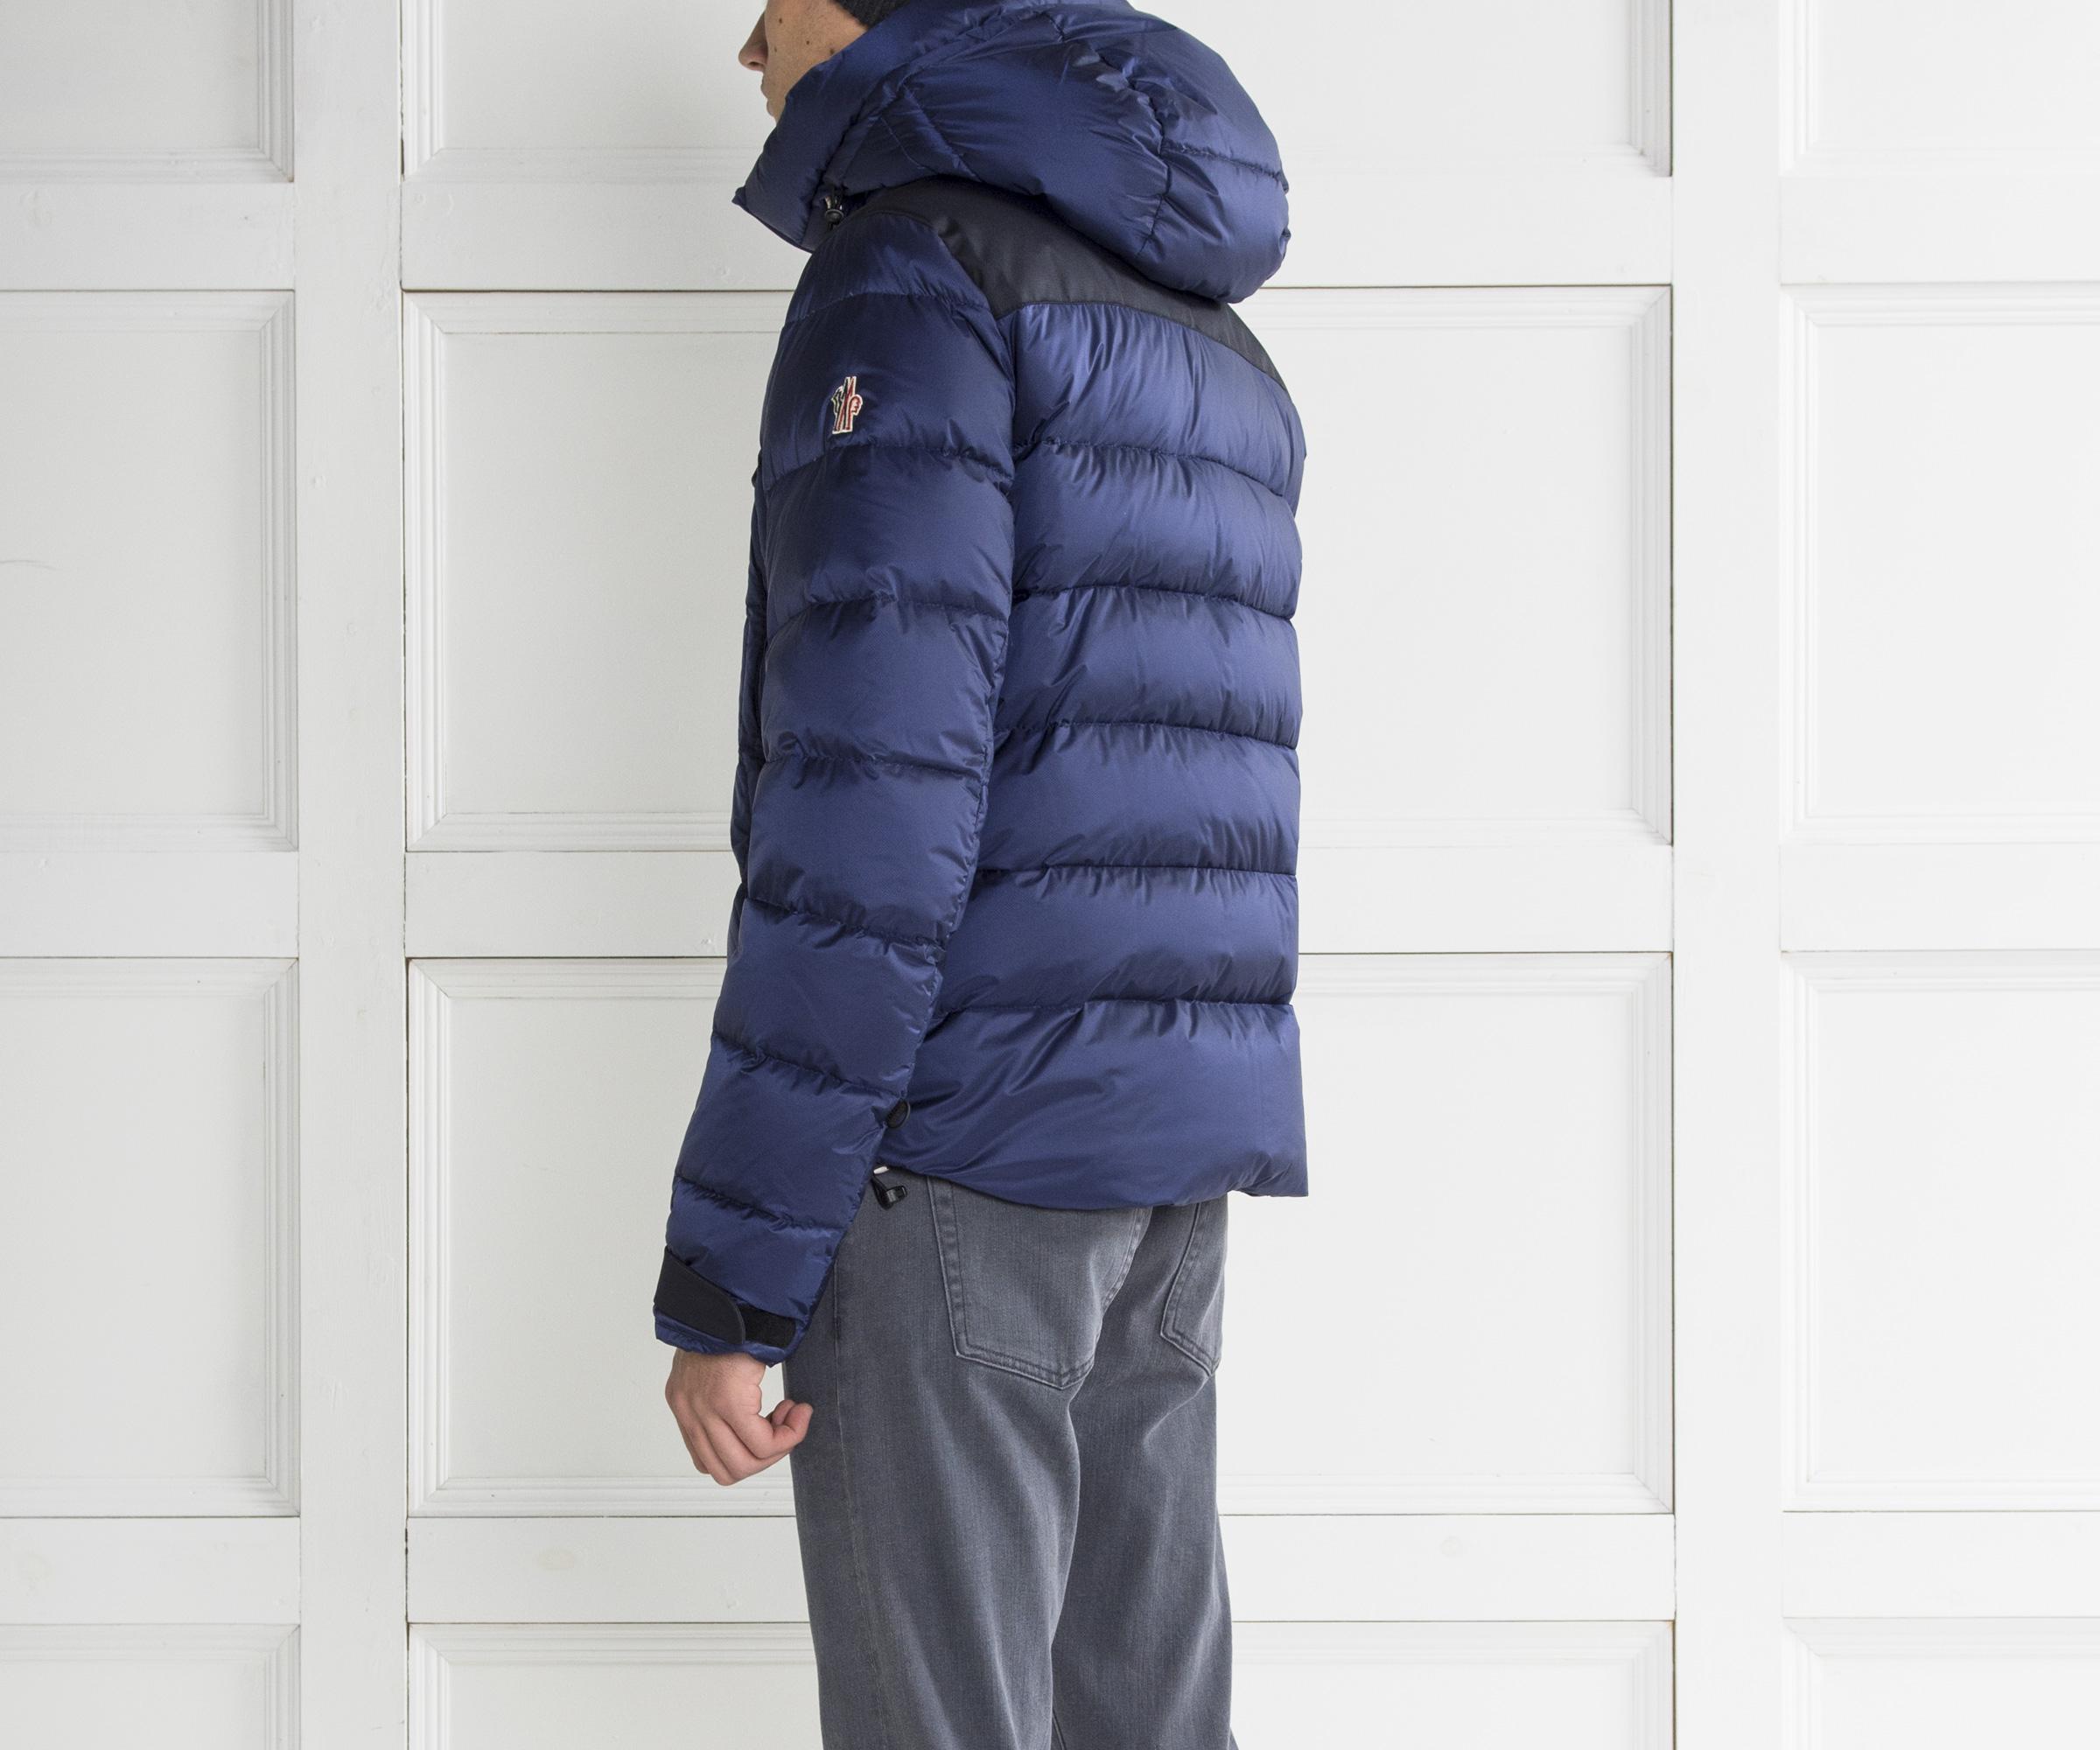 Moncler Grenoble Camurac Jacket, Buy Now, Hotsell, 59% OFF,  www.officelist.com